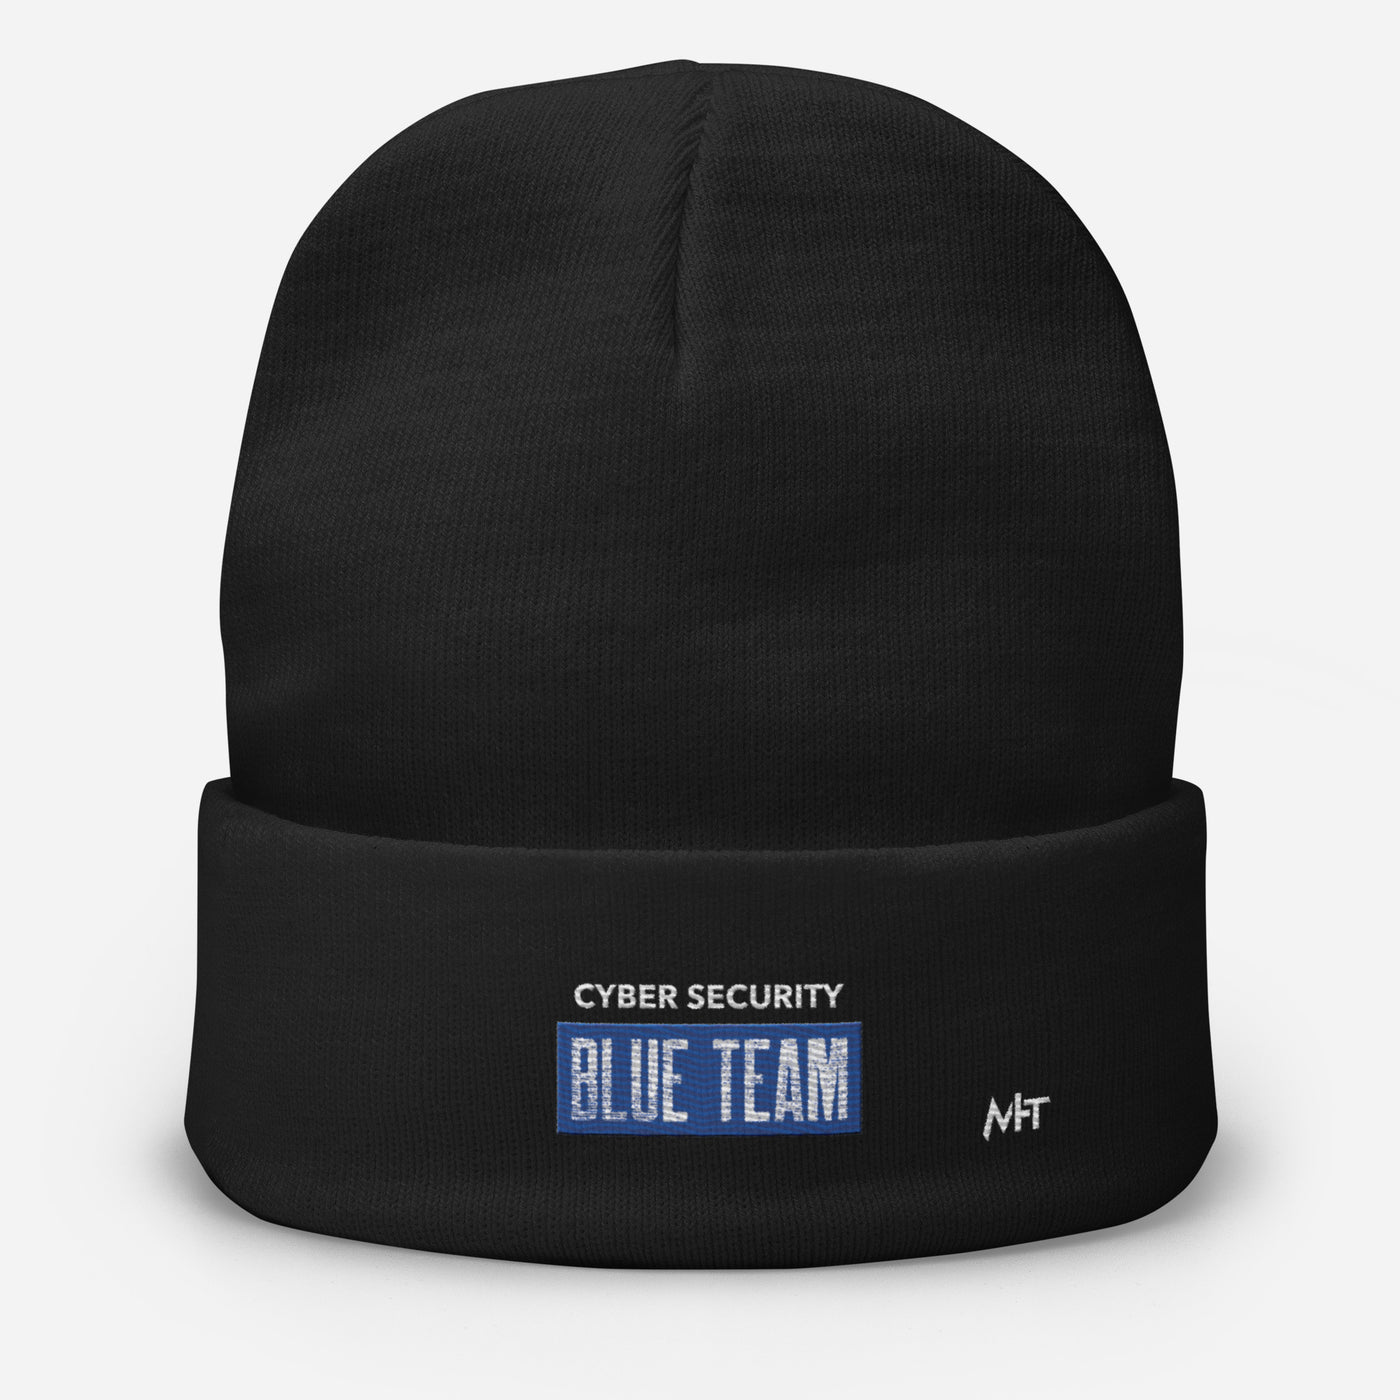 Cyber Security Blue Team V5 - Embroidered Beanie